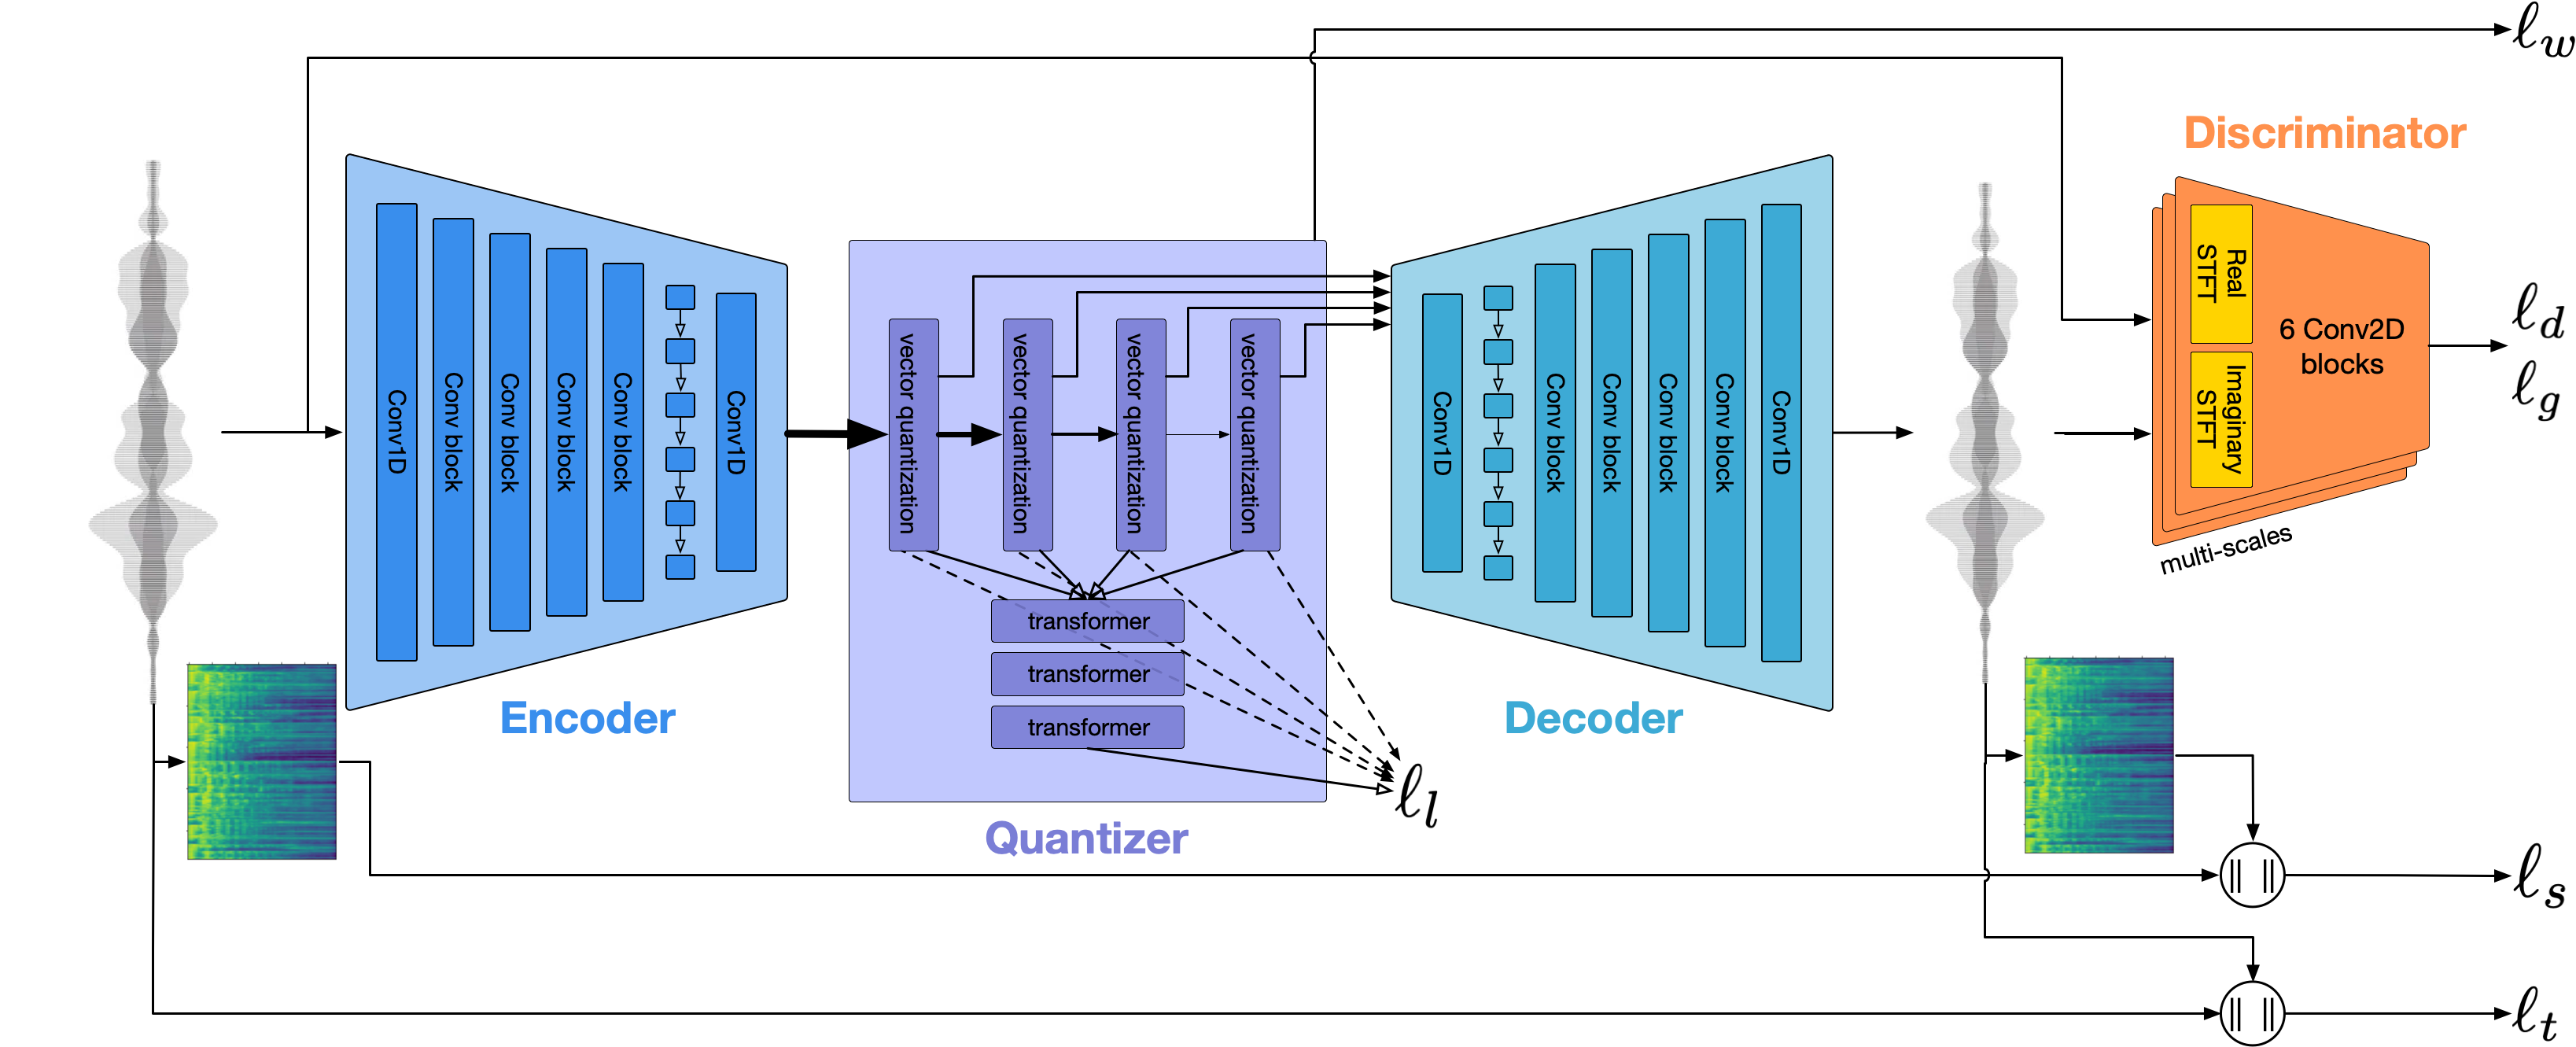 Schema representing the structure of Encodec,
    with a convolutional+LSTM encoder, a Residual Vector Quantization in the middle,
    followed by a convolutional+LSTM decoder. A multiscale complex spectrogram discriminator is applied to the output, along with objective reconstruction losses.
    A small transformer model is trained to predict the RVQ output.